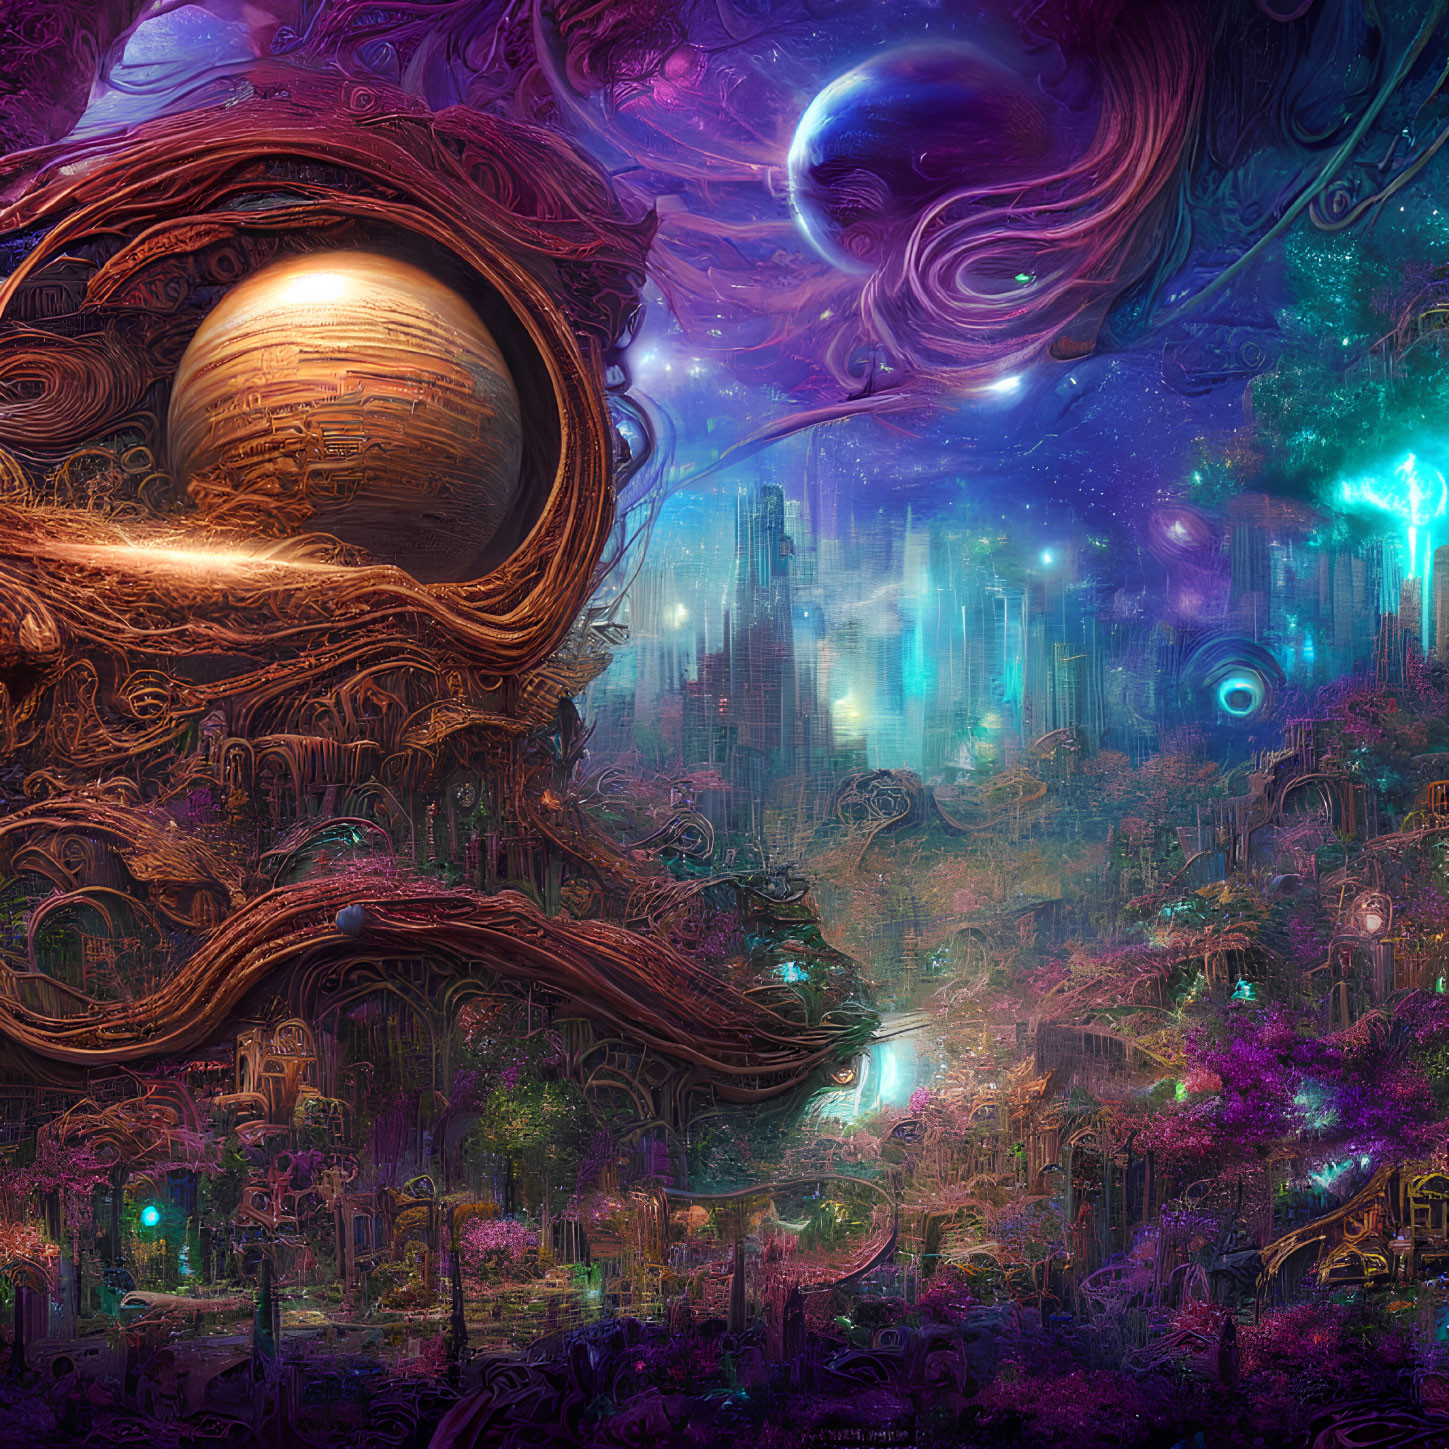 Fantasy landscape with alien architecture, cosmic bodies, and neon flora